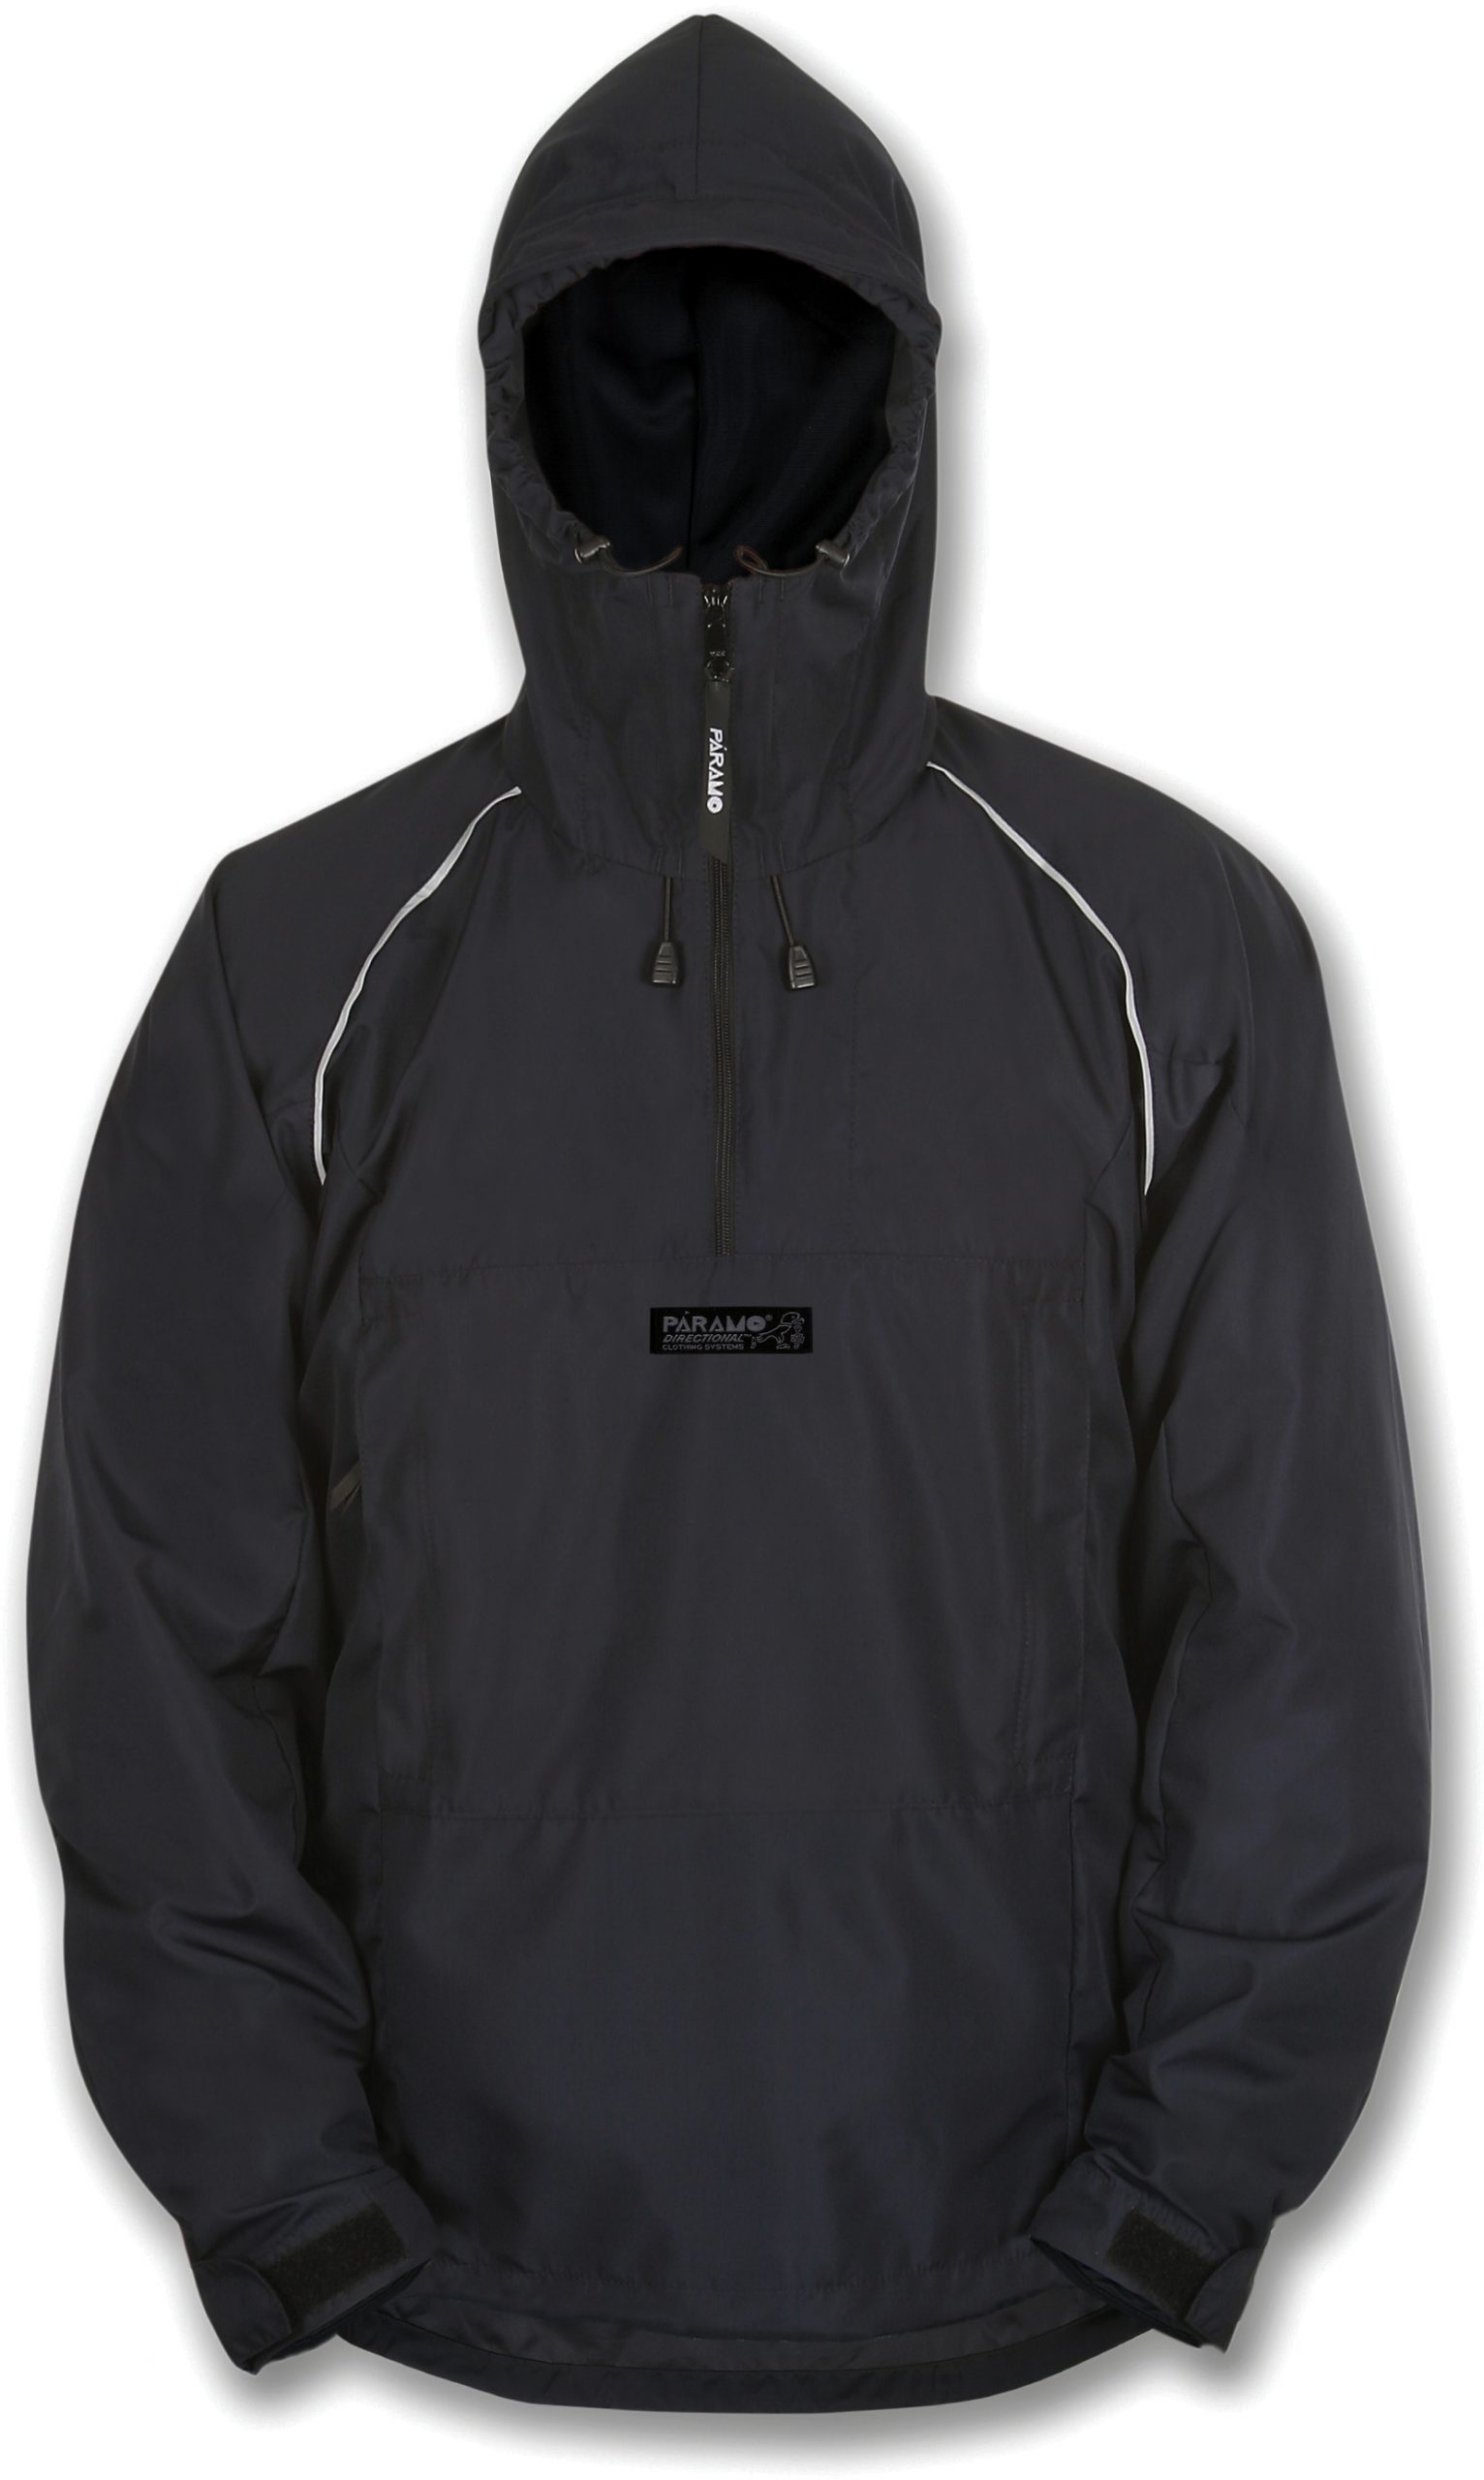 Buy a Paramo Fuera Windproof Smock from The Mountaineer, Paramo Premier ...